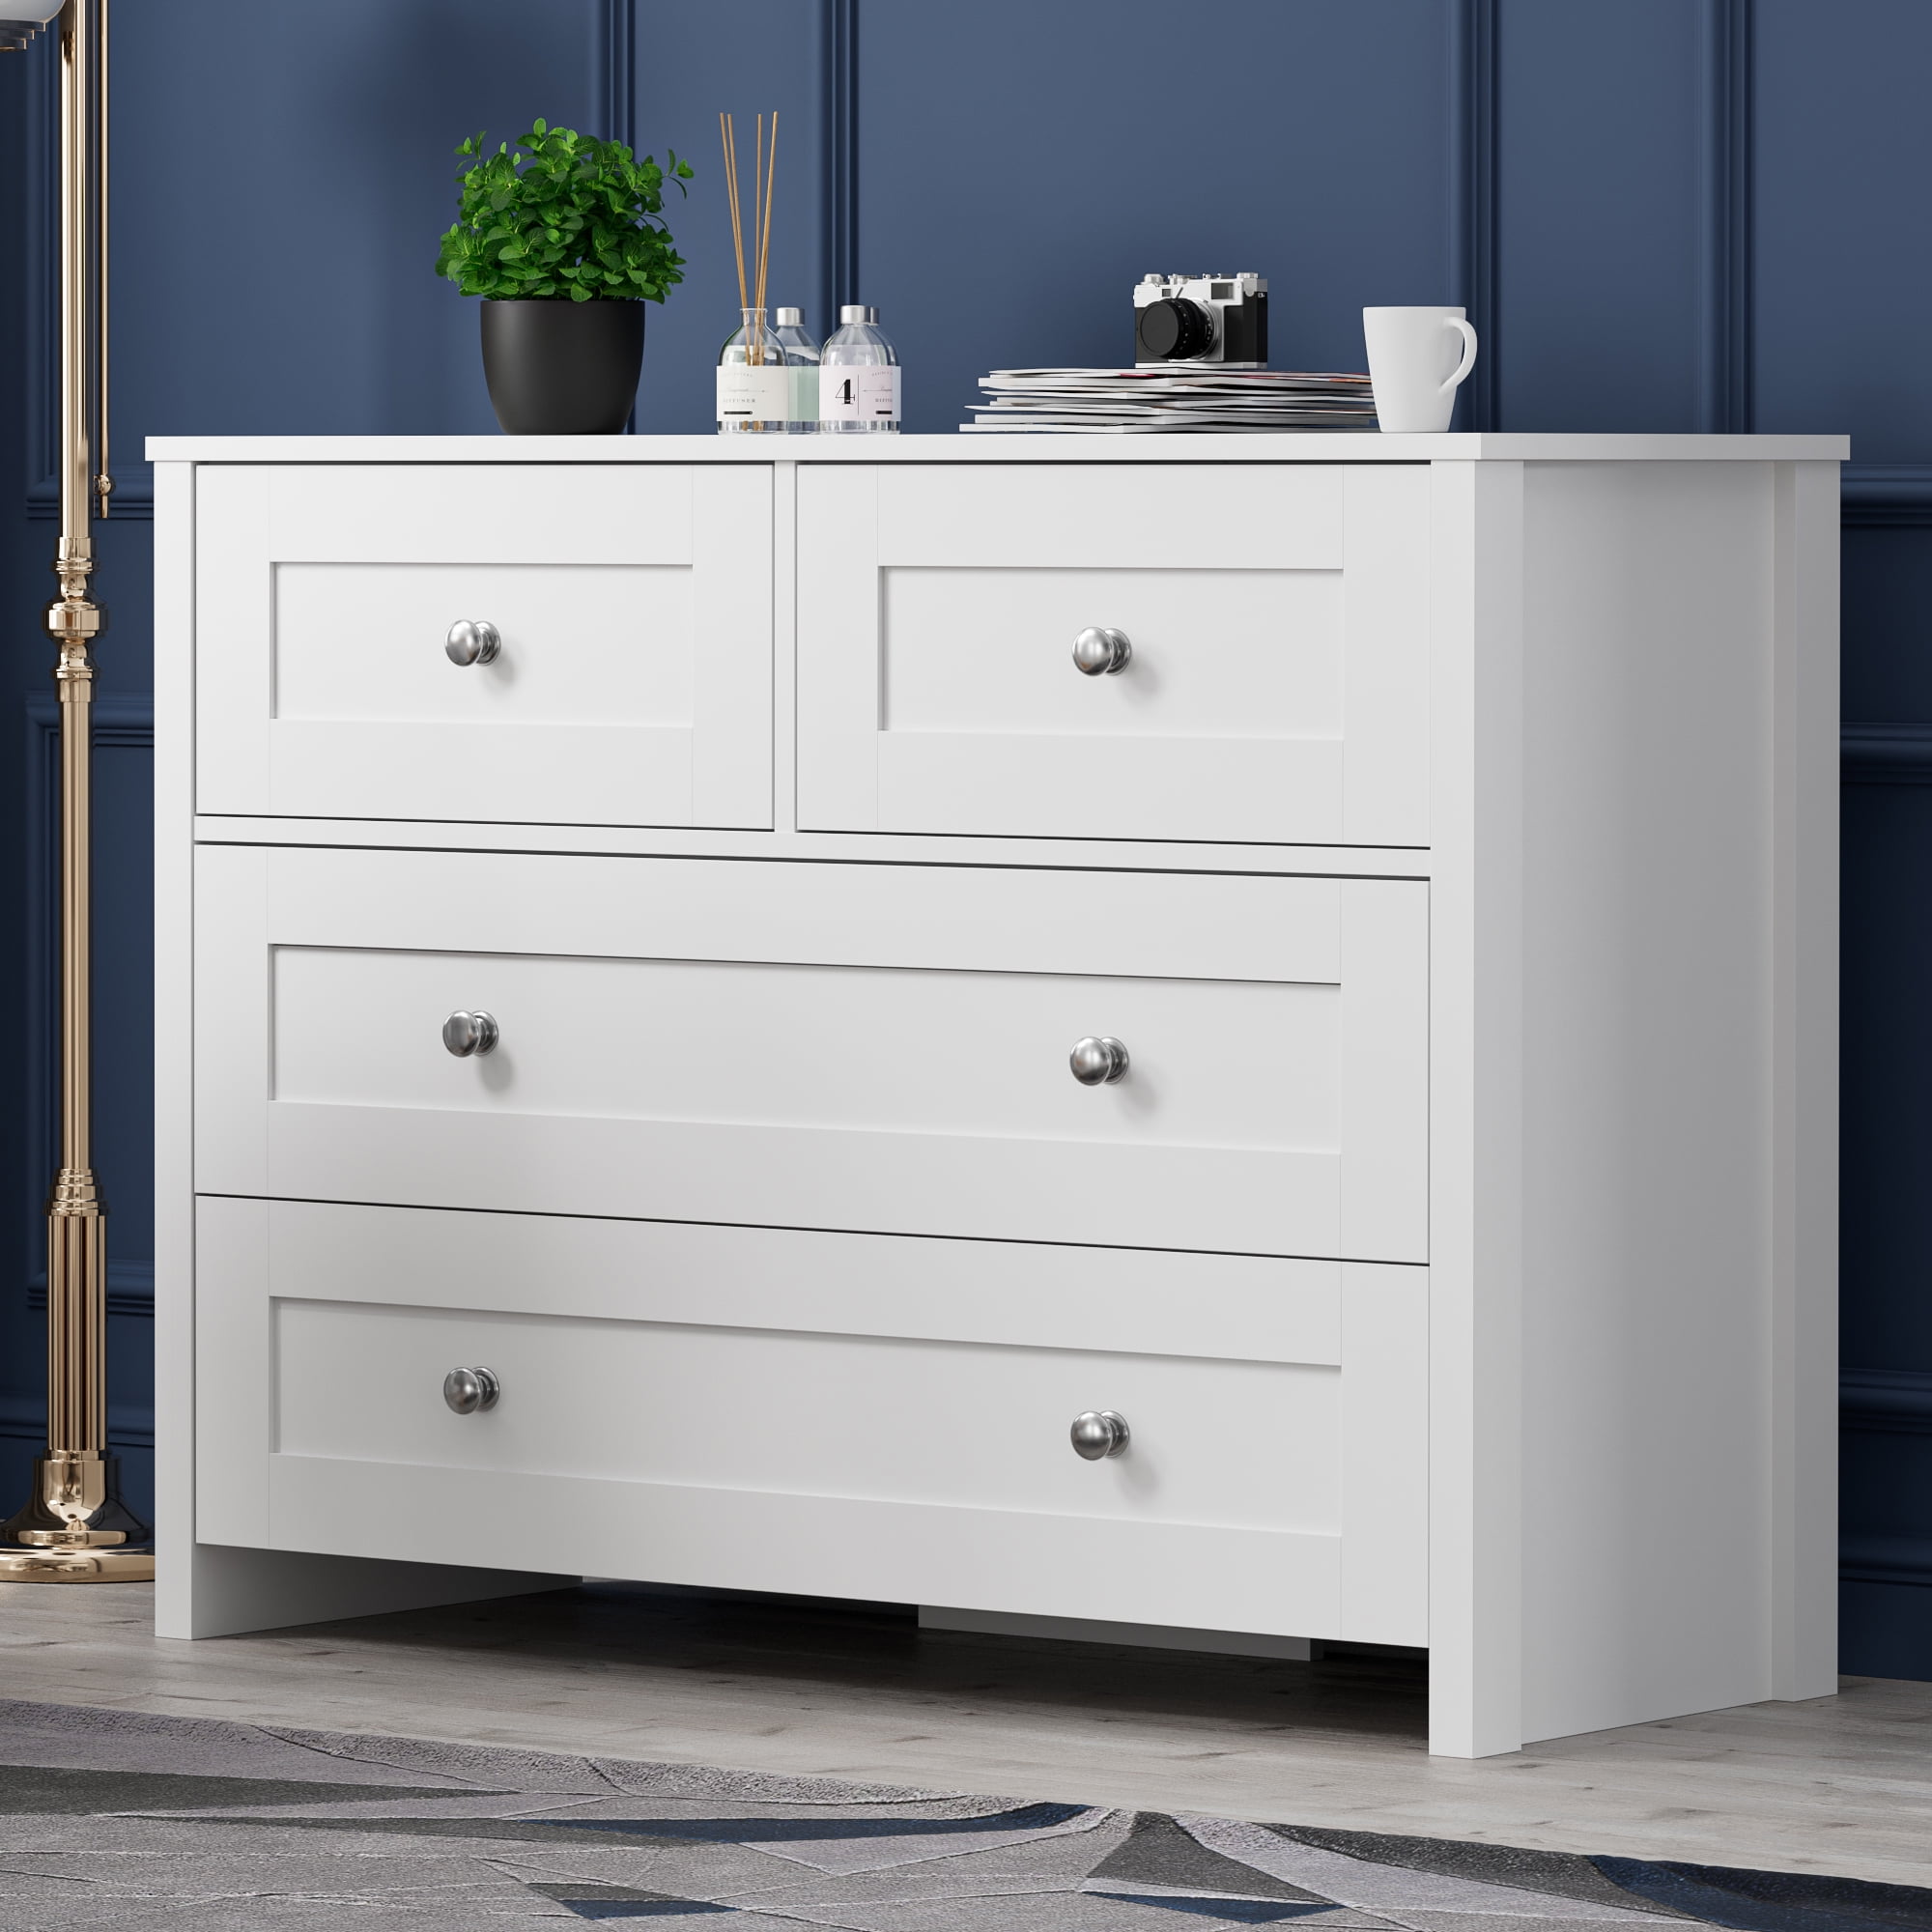 SunsGrove 4 Drawer Dresser, Modern Chest of Drawers, with Wood Storage ...